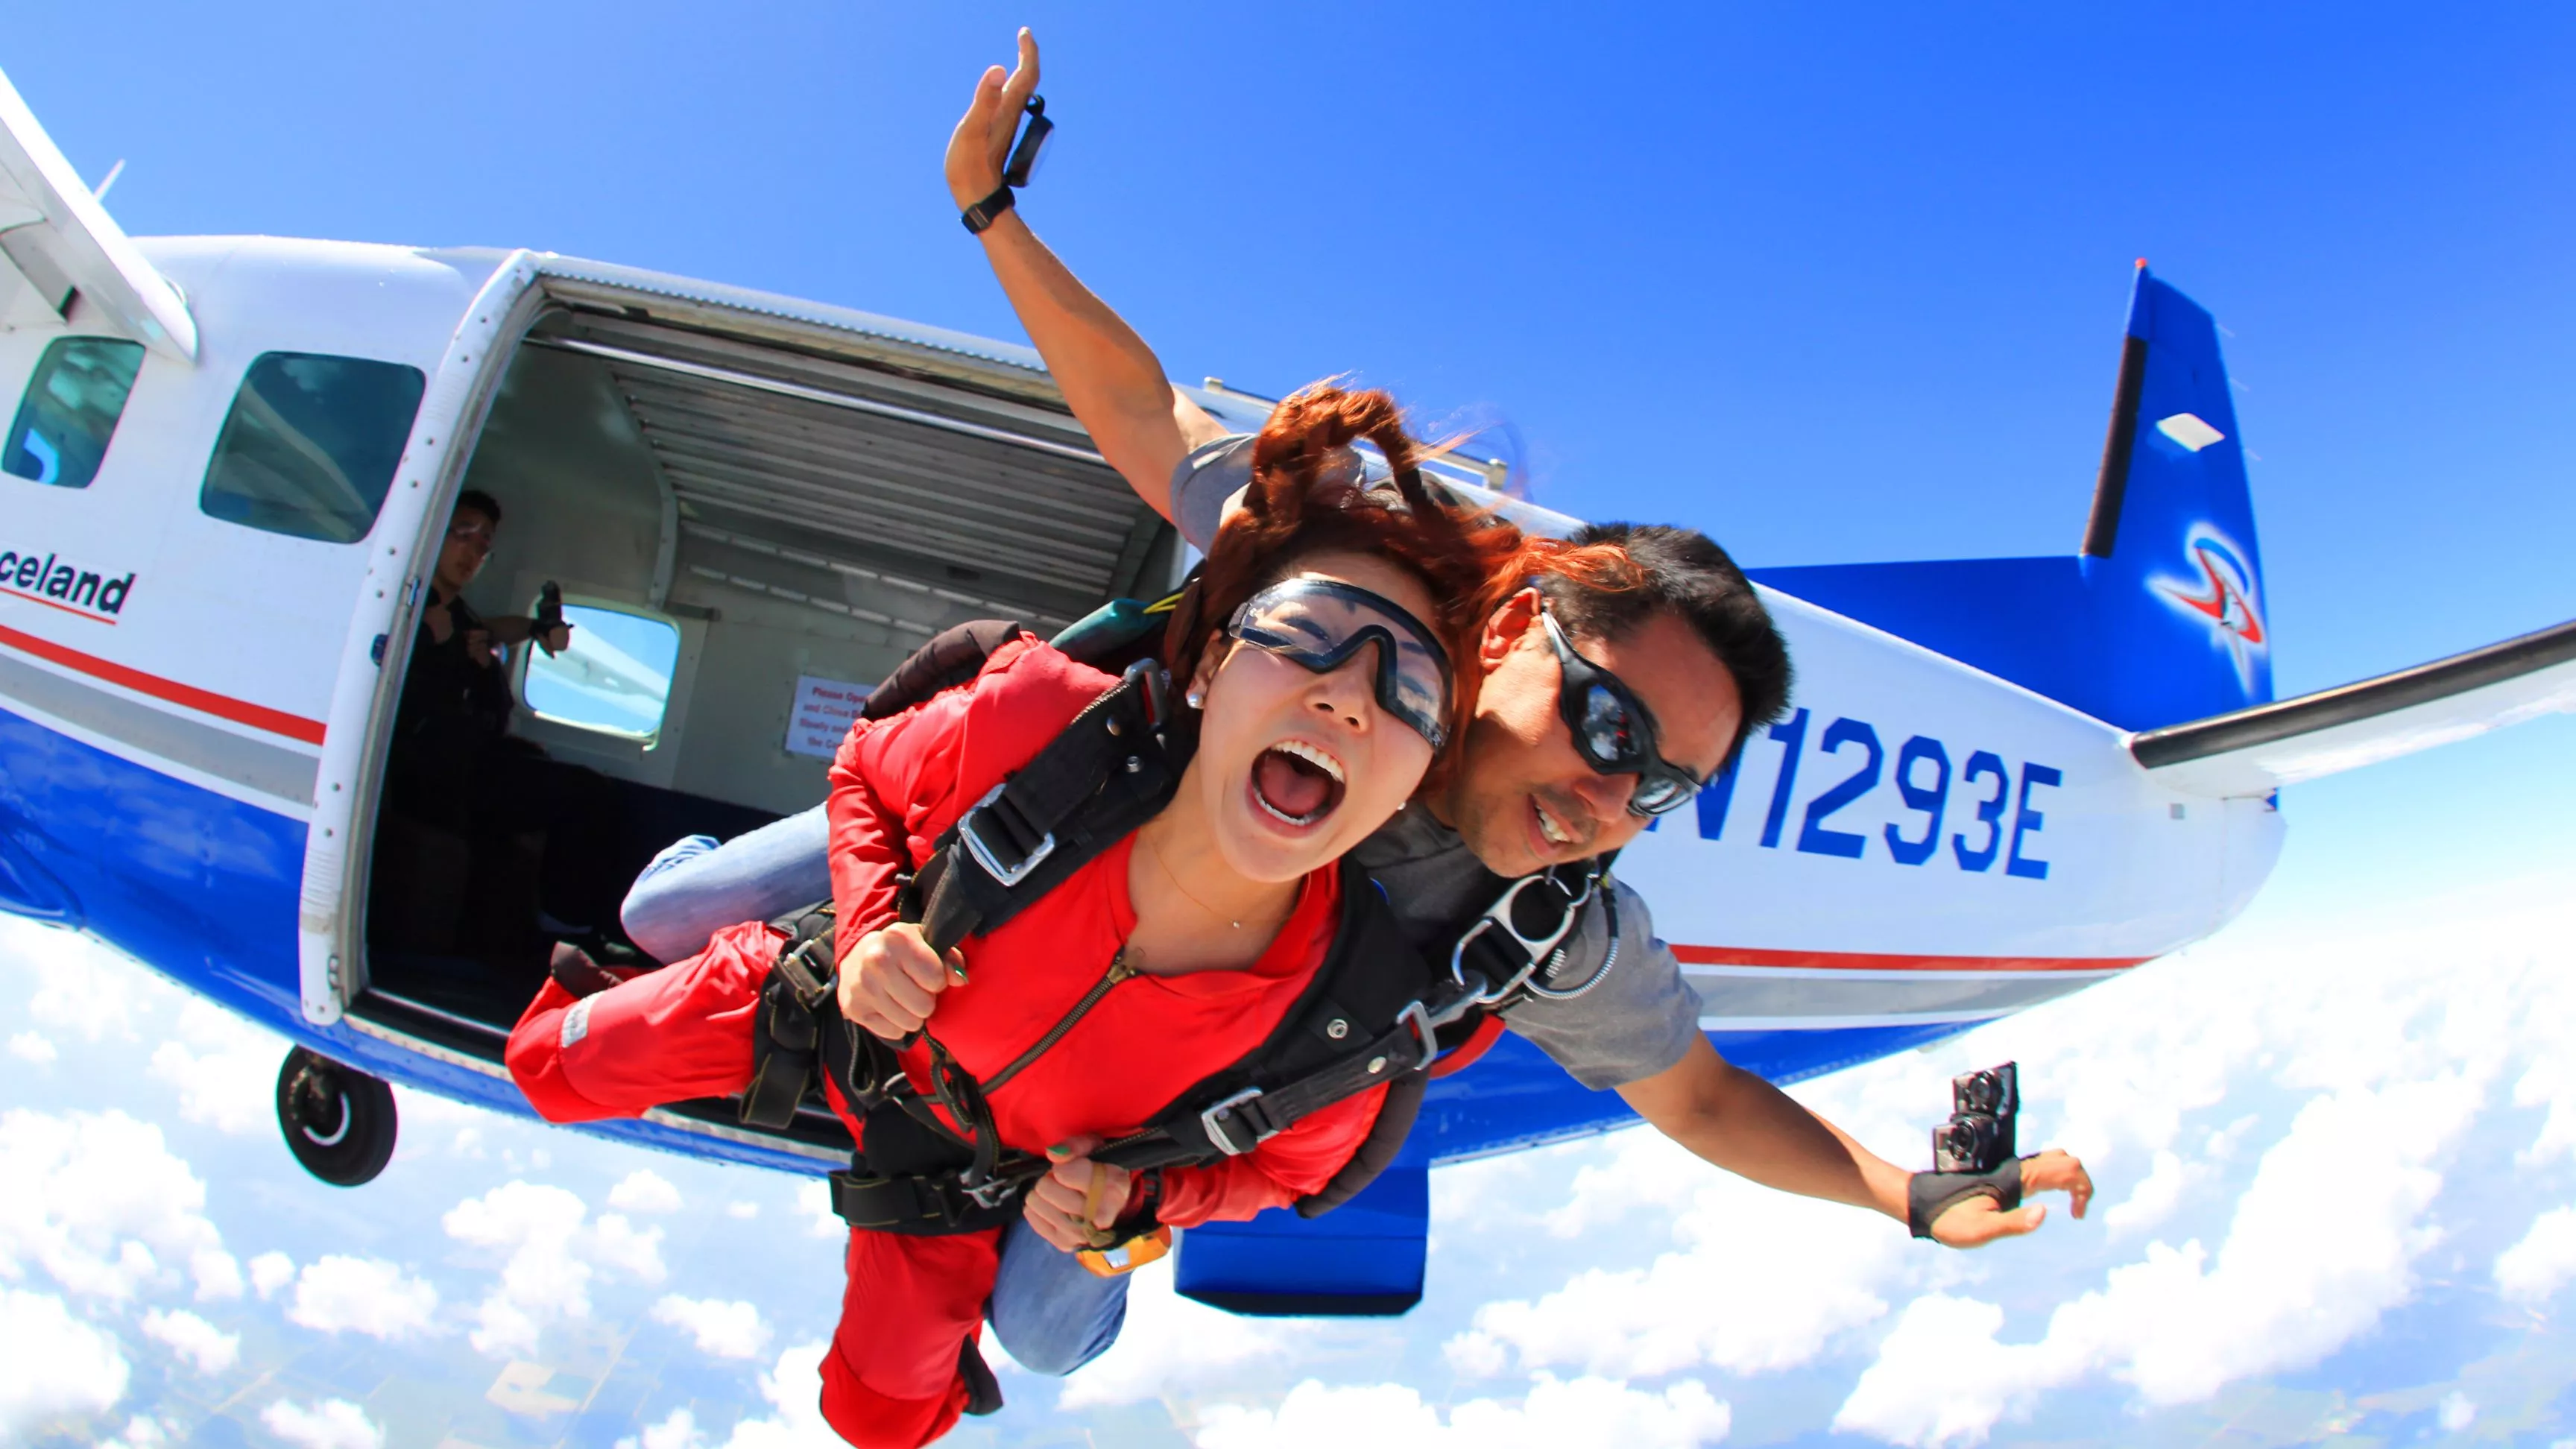 Skydive Tandem Company in Zimbabwe, Africa | Skydiving - Rated 1